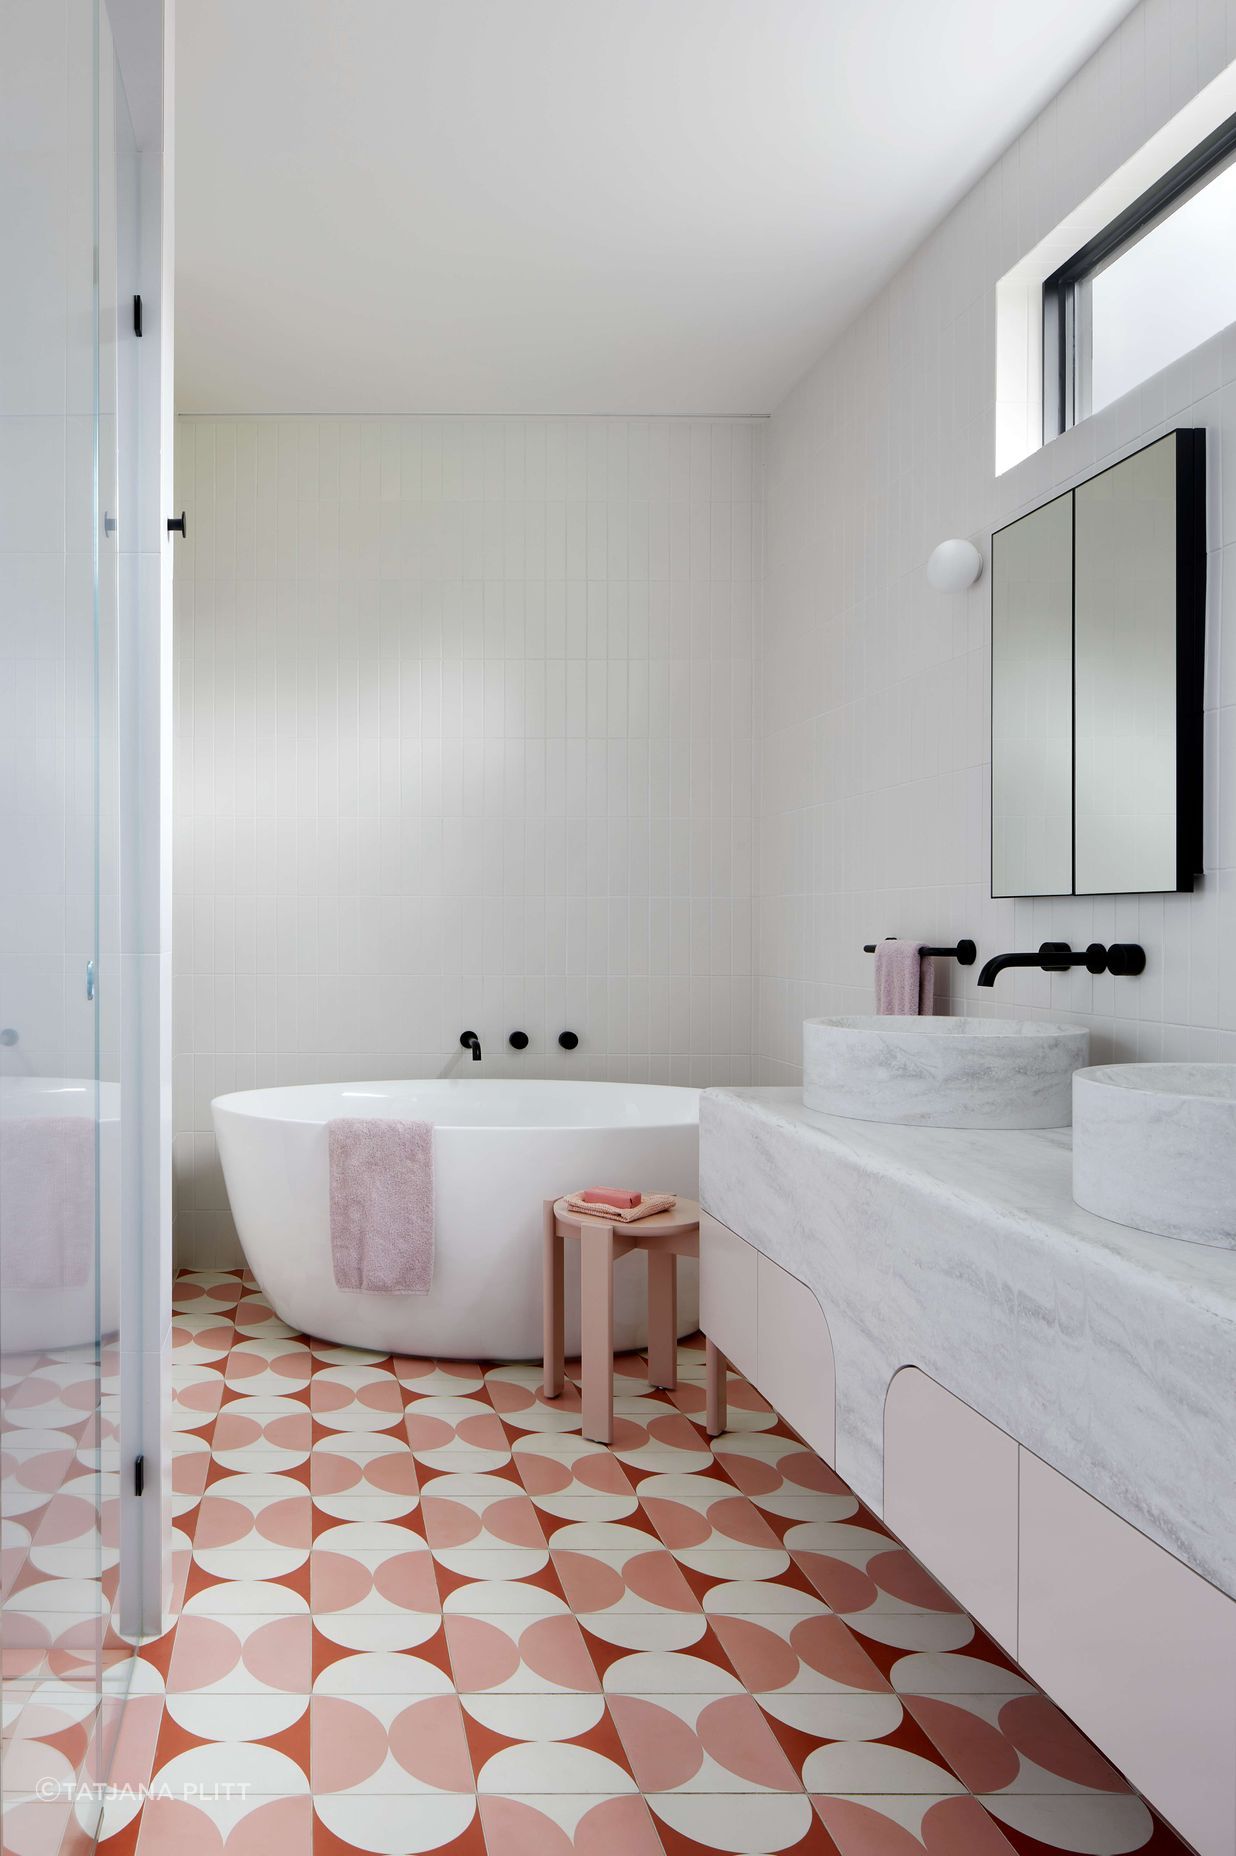 Art Deco inspired large ensuite bathroom with pink and cream Butterfly tile from Perini, featuring a top mounted, double sink from corian, Forme L'isola  Freestanding Bath  and walk in shower.   Located in Melbourne, see more from our Arch Deco Project. The colour scheme references the colours used commonly during the Art Deco period of the house.